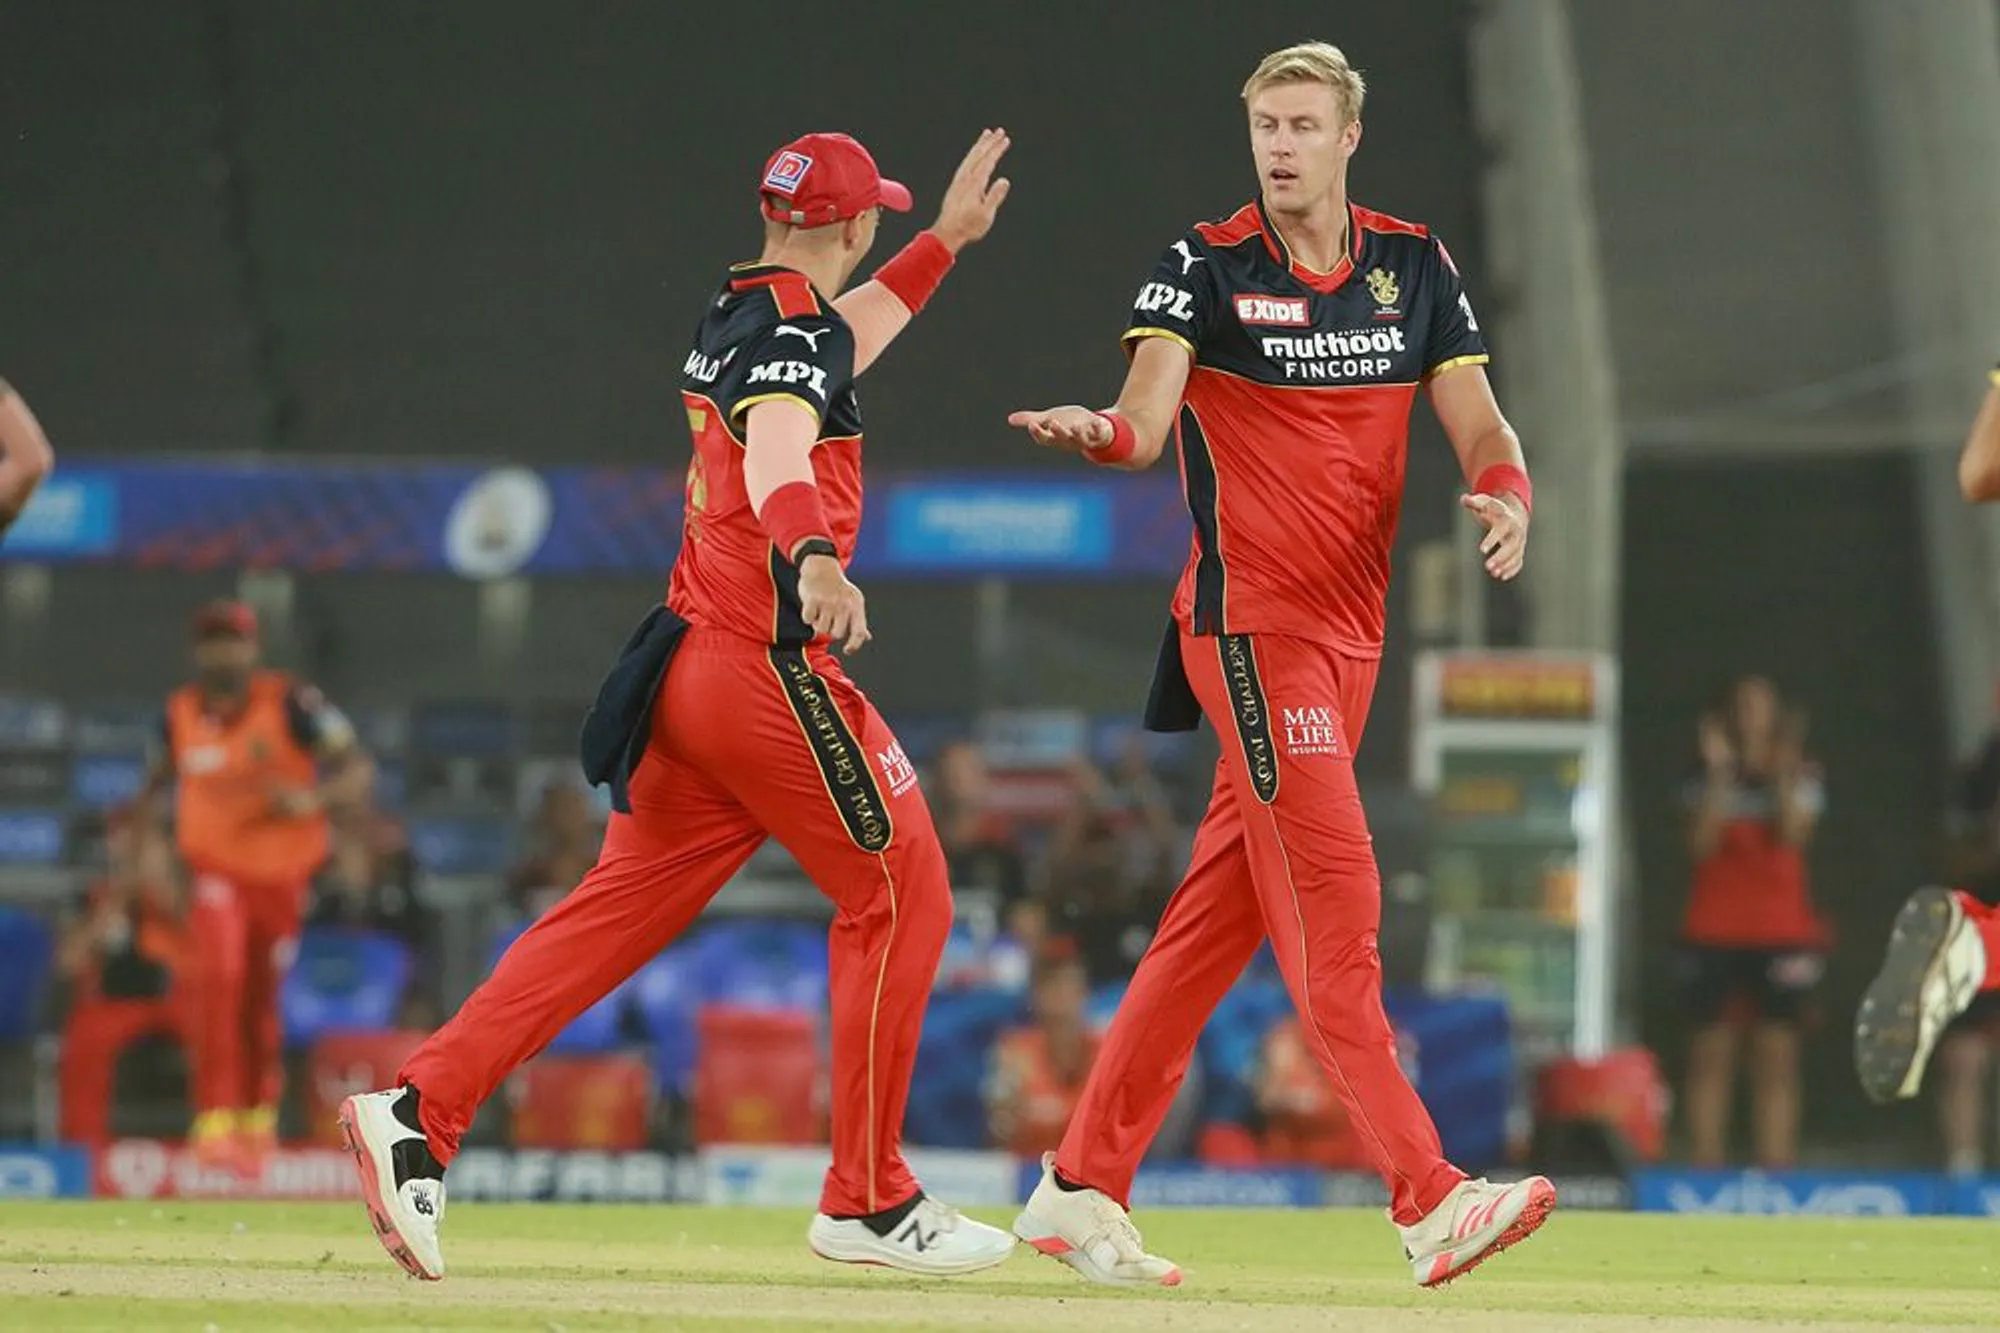 The IPL Dukes ball story was just Christian adding some stuff to make good story, reveals Kyle Jamieson